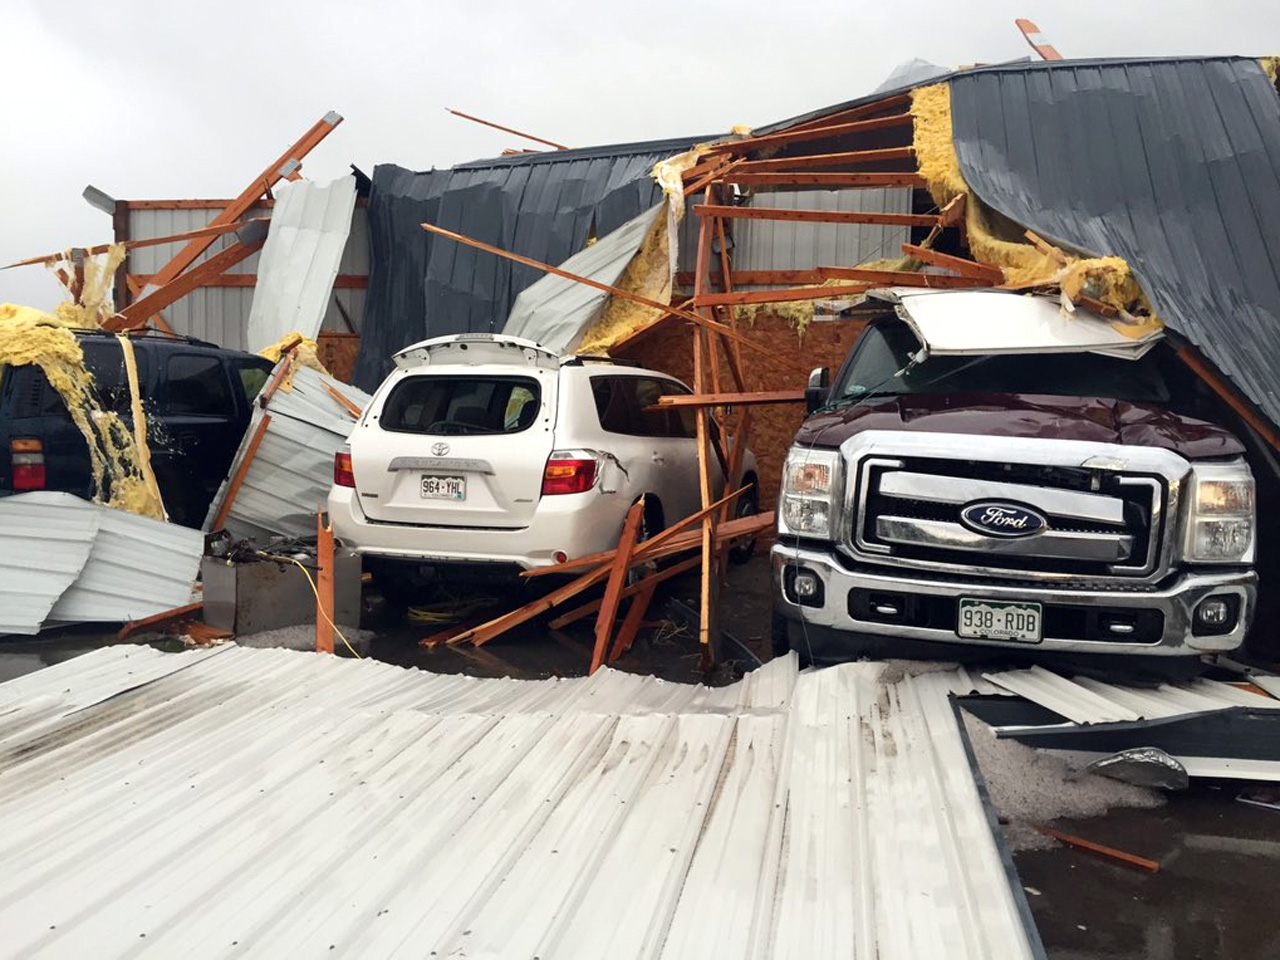 Colorado hit by several tornadoes amid swarm of spring storms CBS News